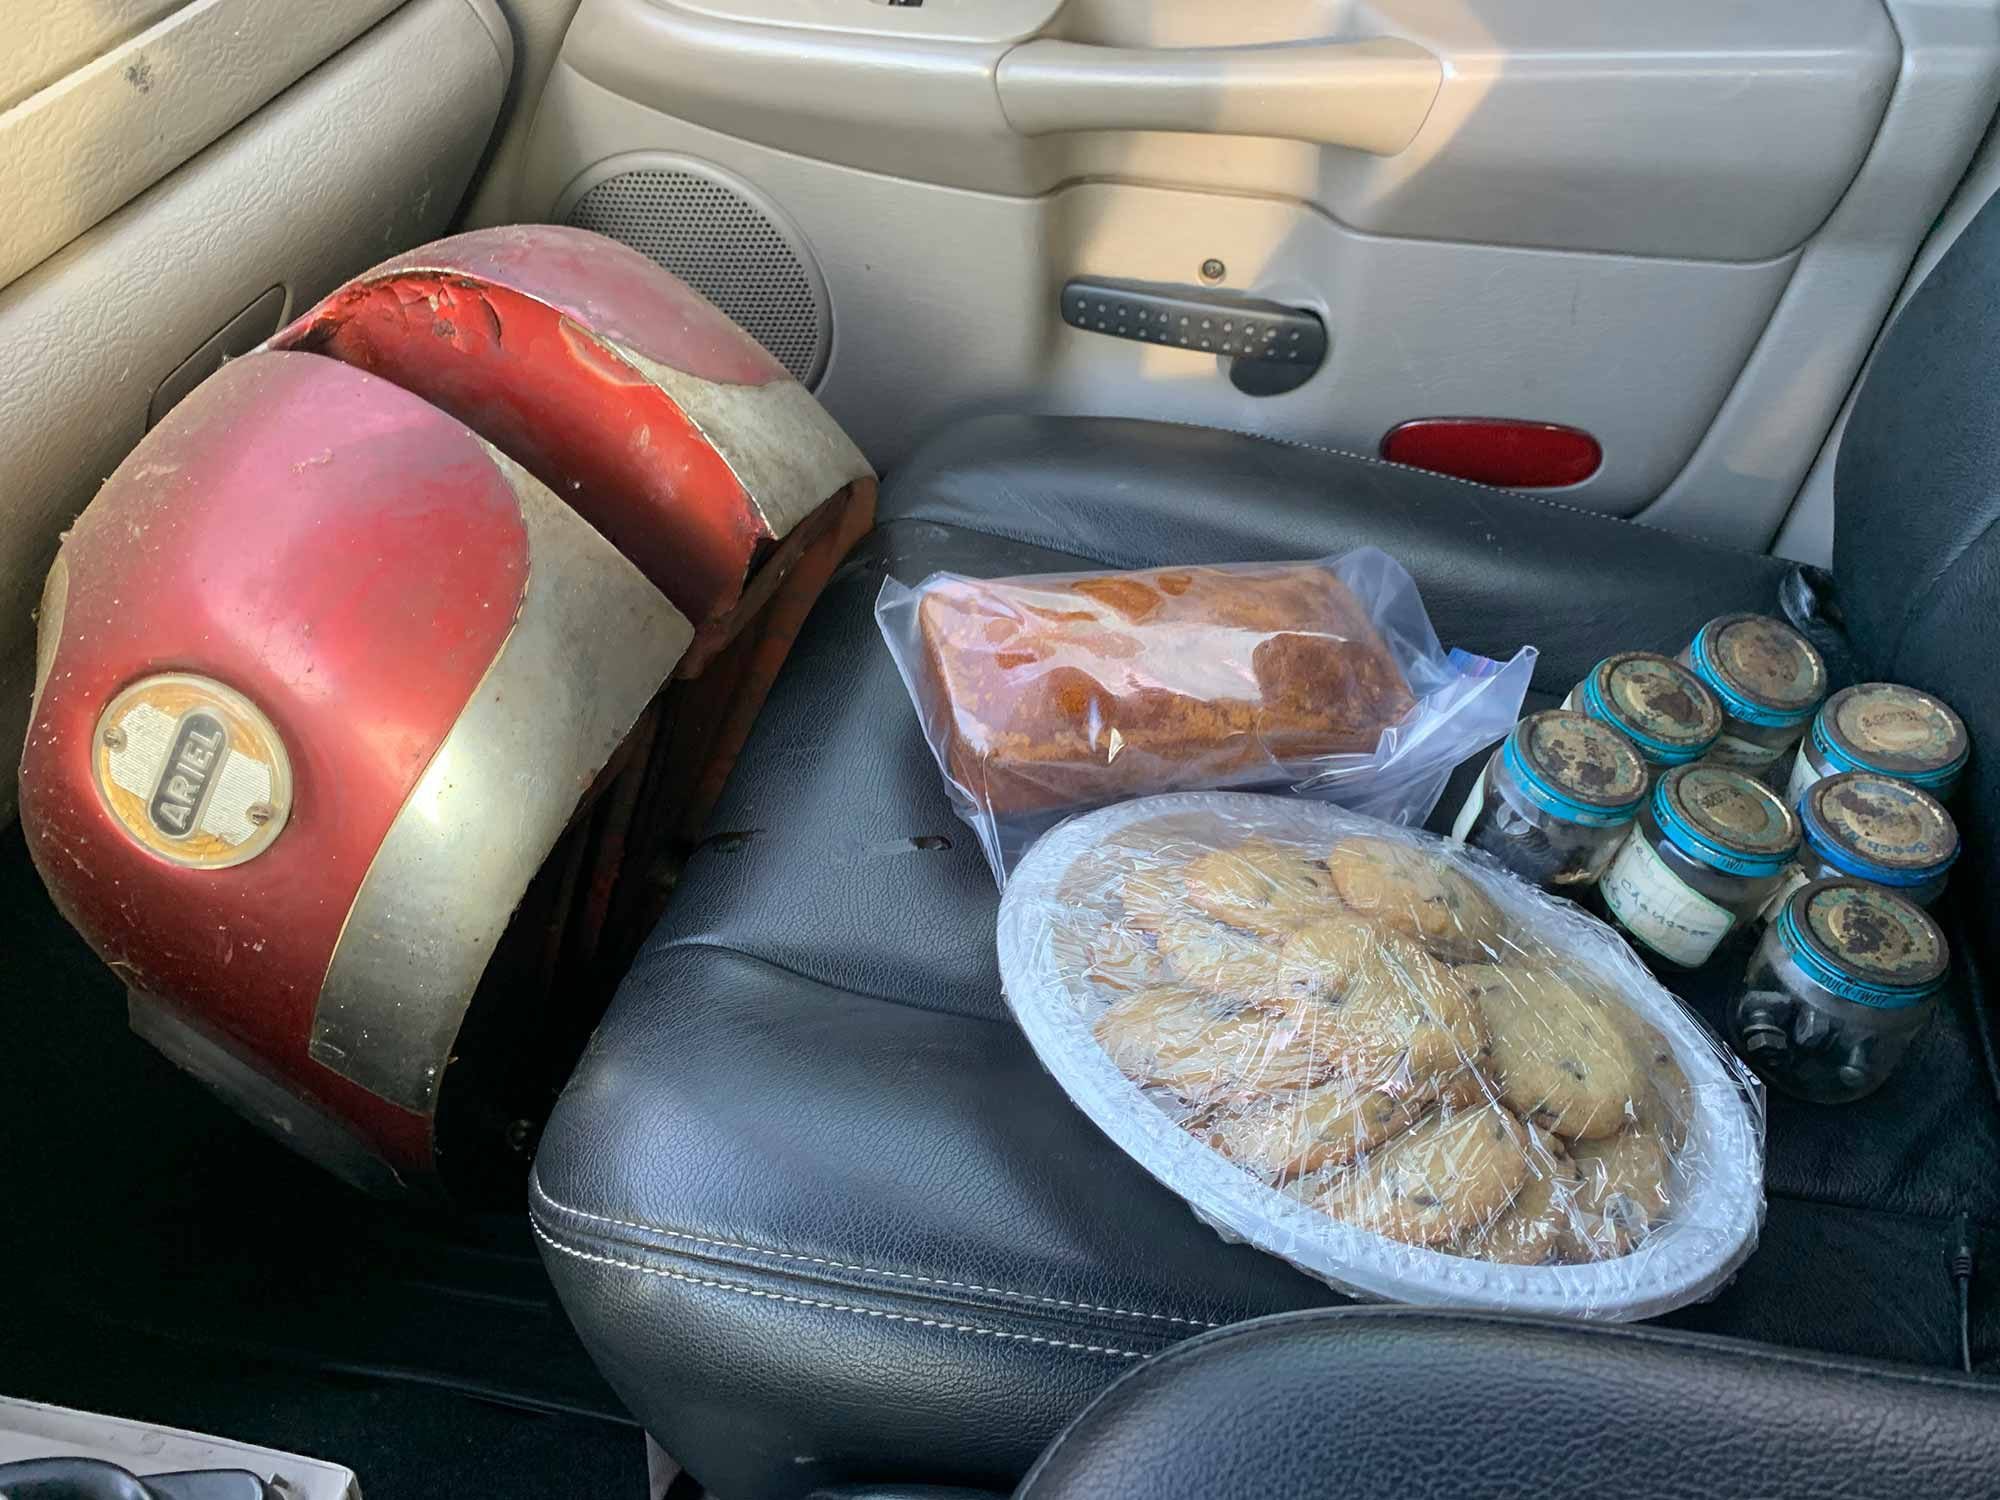 Leaving Ruthie’s house, J’s passenger seat holds an Ariel Square Four gas tank, some old jars of nuts and bolts, and some homemade pumpkin bread and cookies.